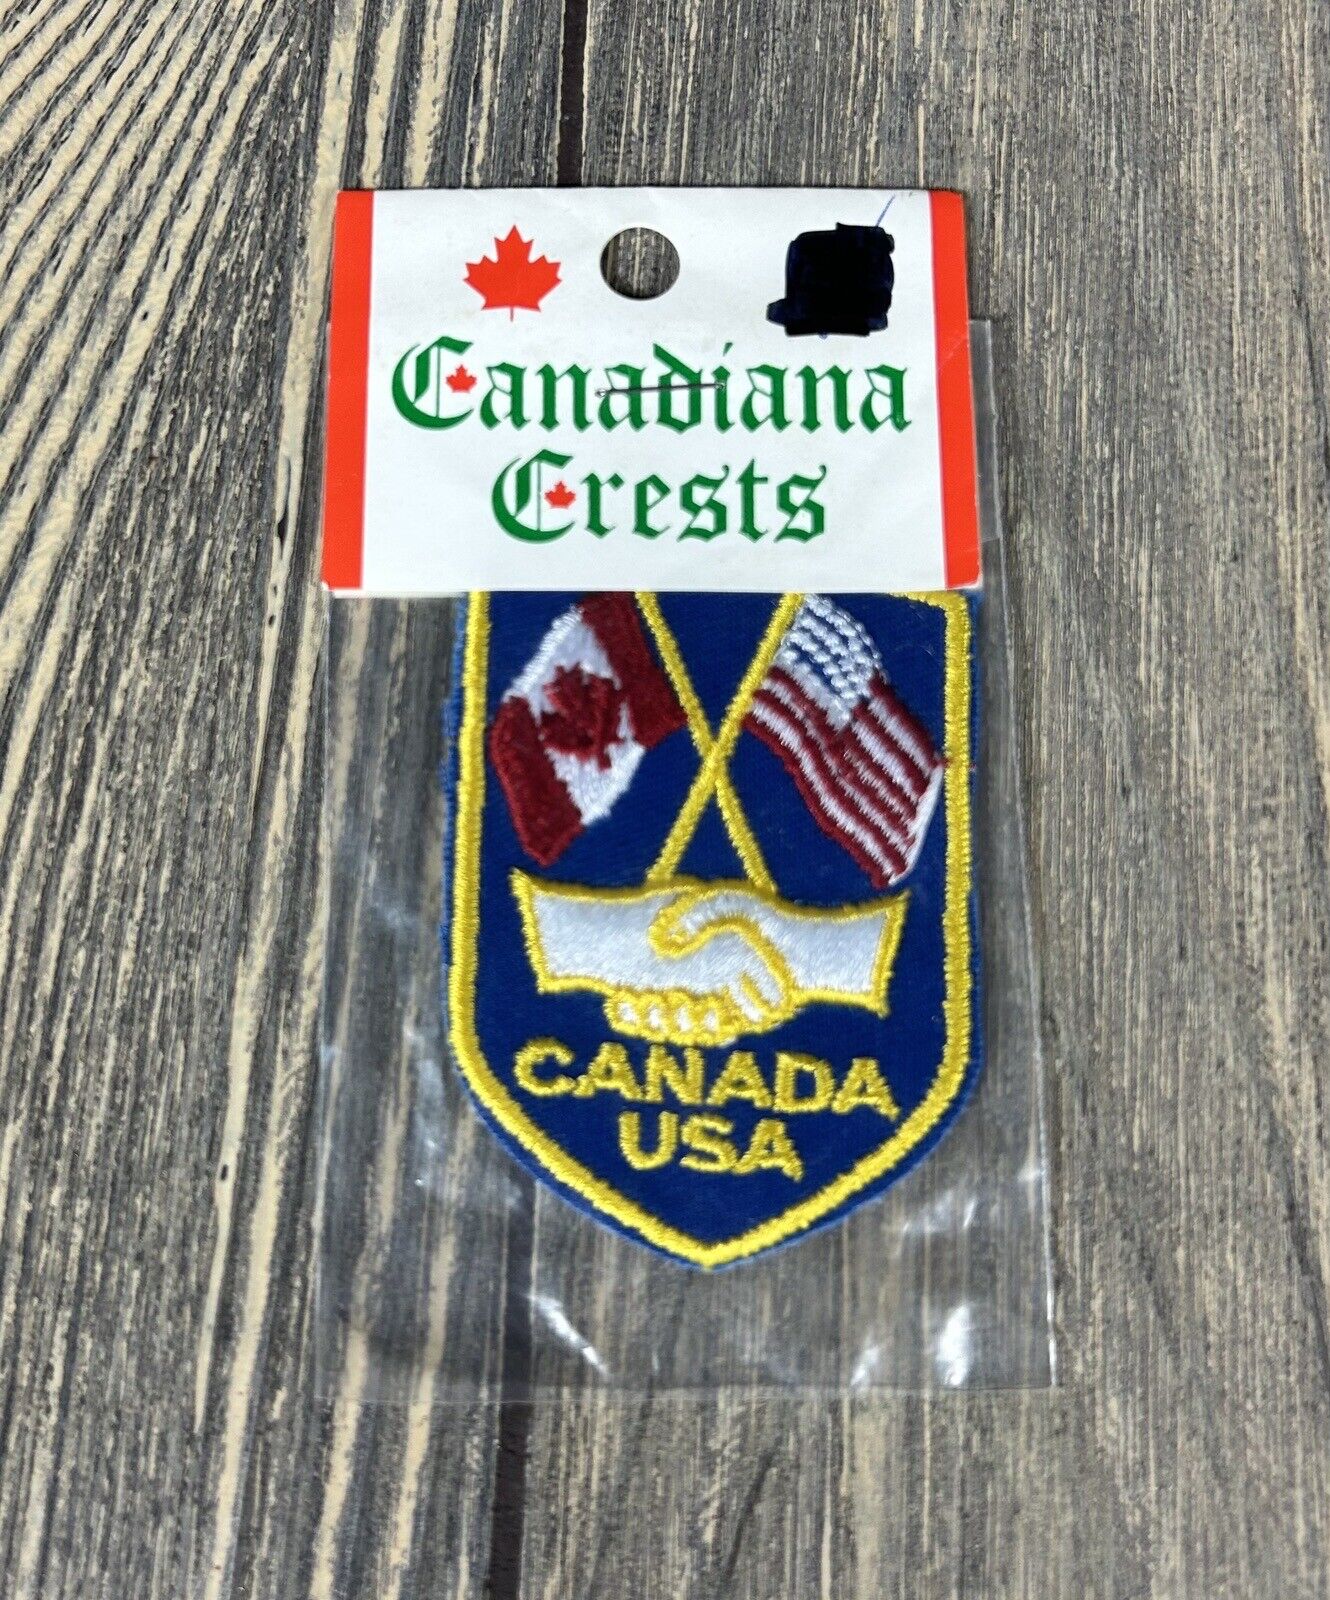 Vintage Canadian Crests Canada USA Embroidered Badge